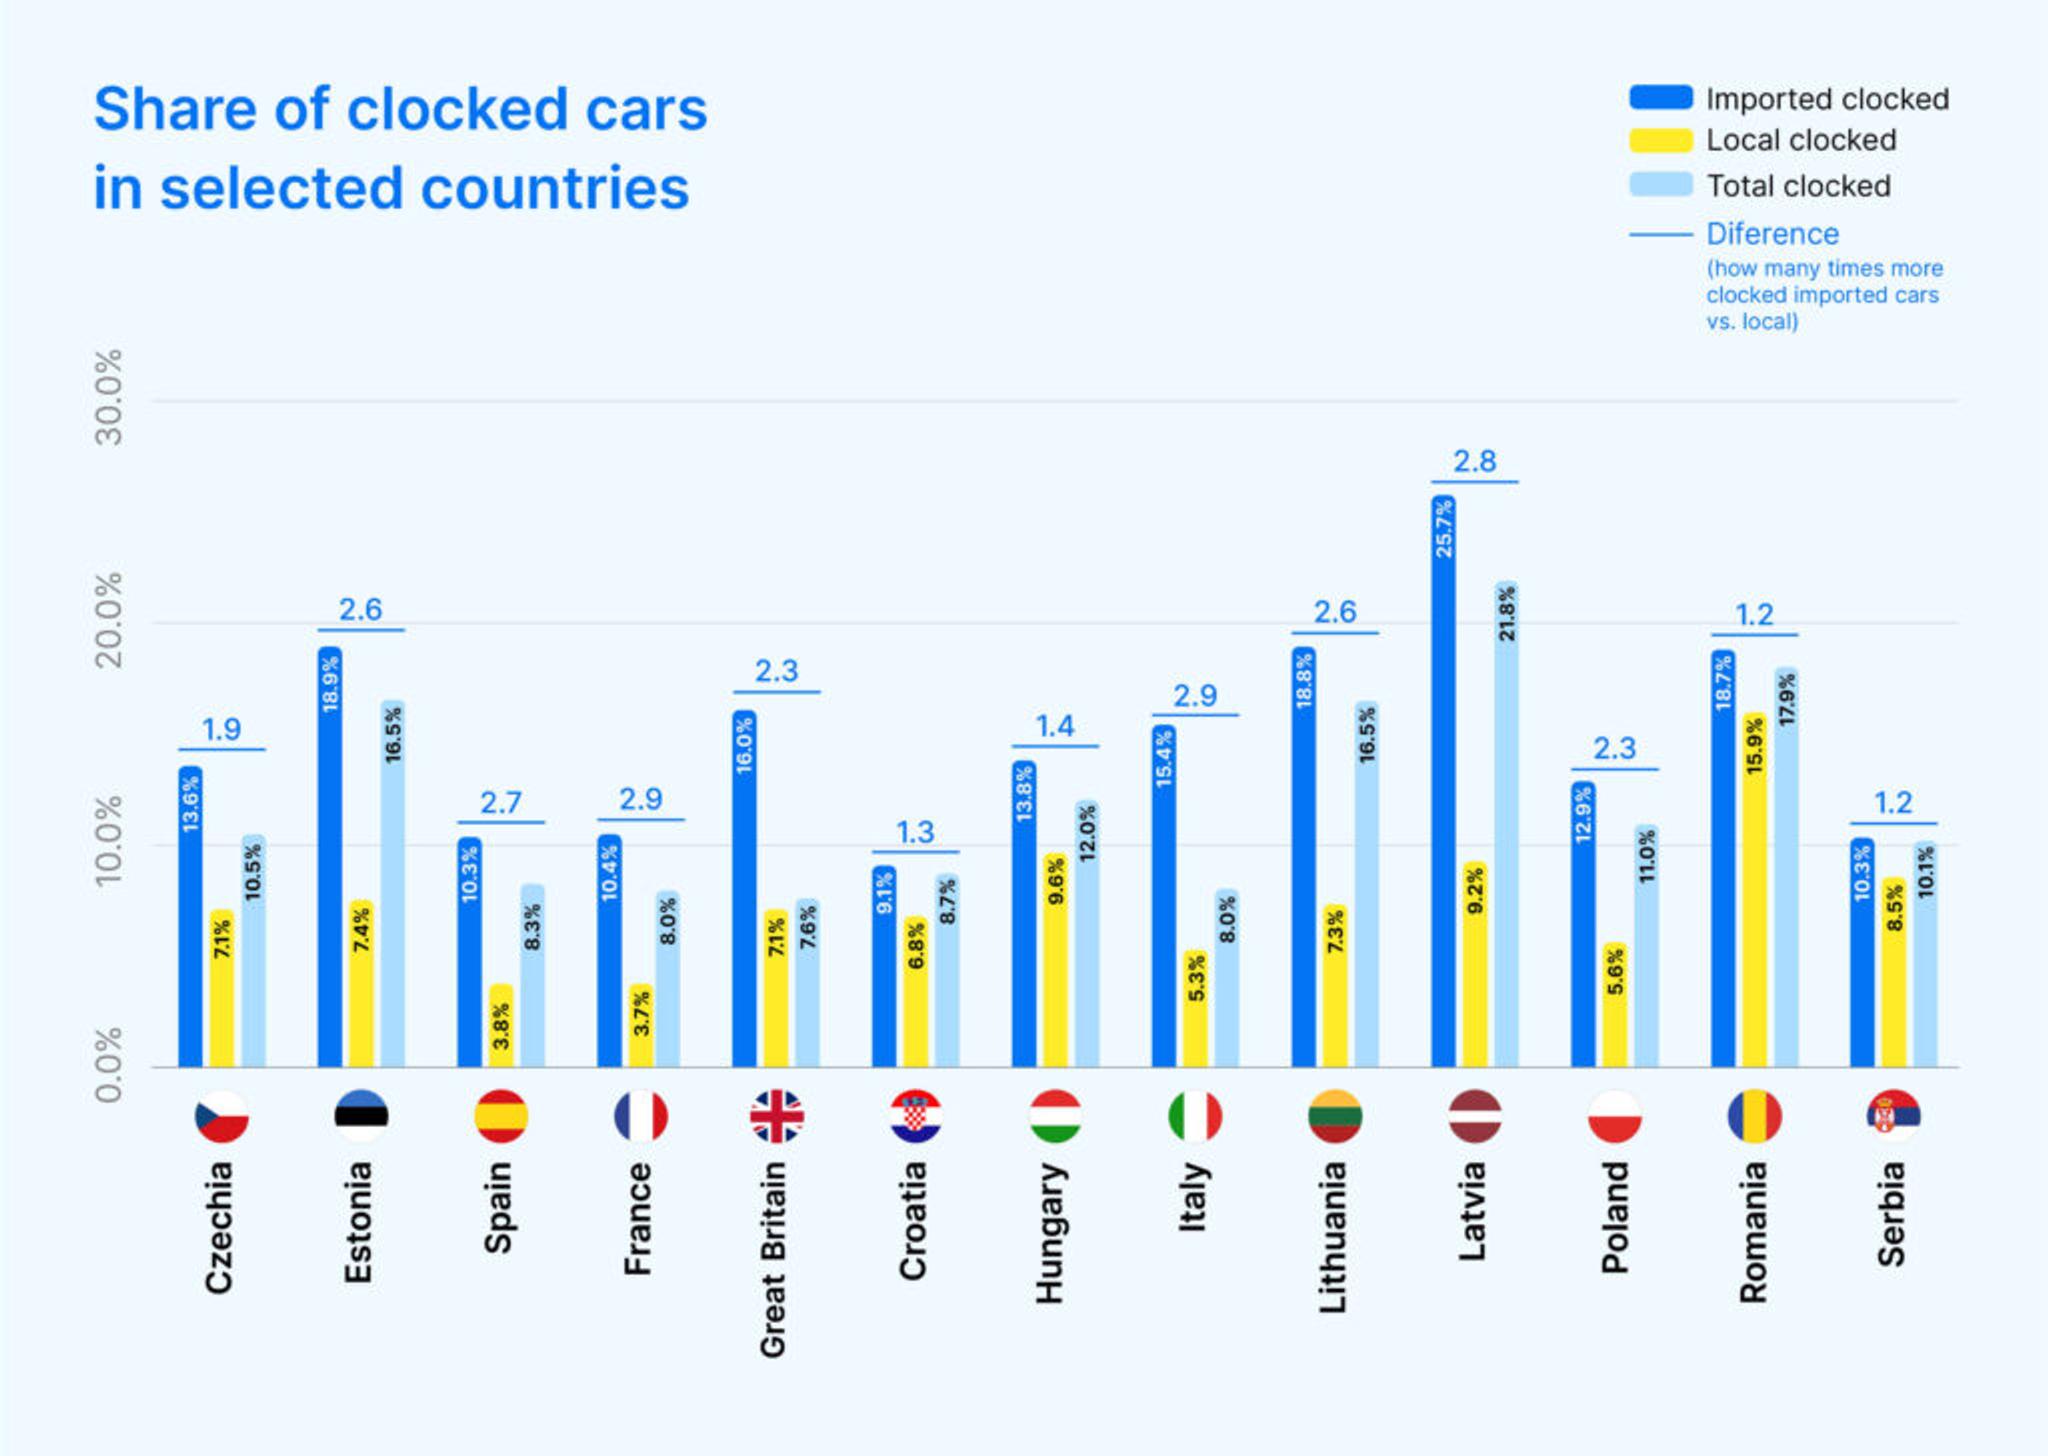 Share of clocked cars in selected countries